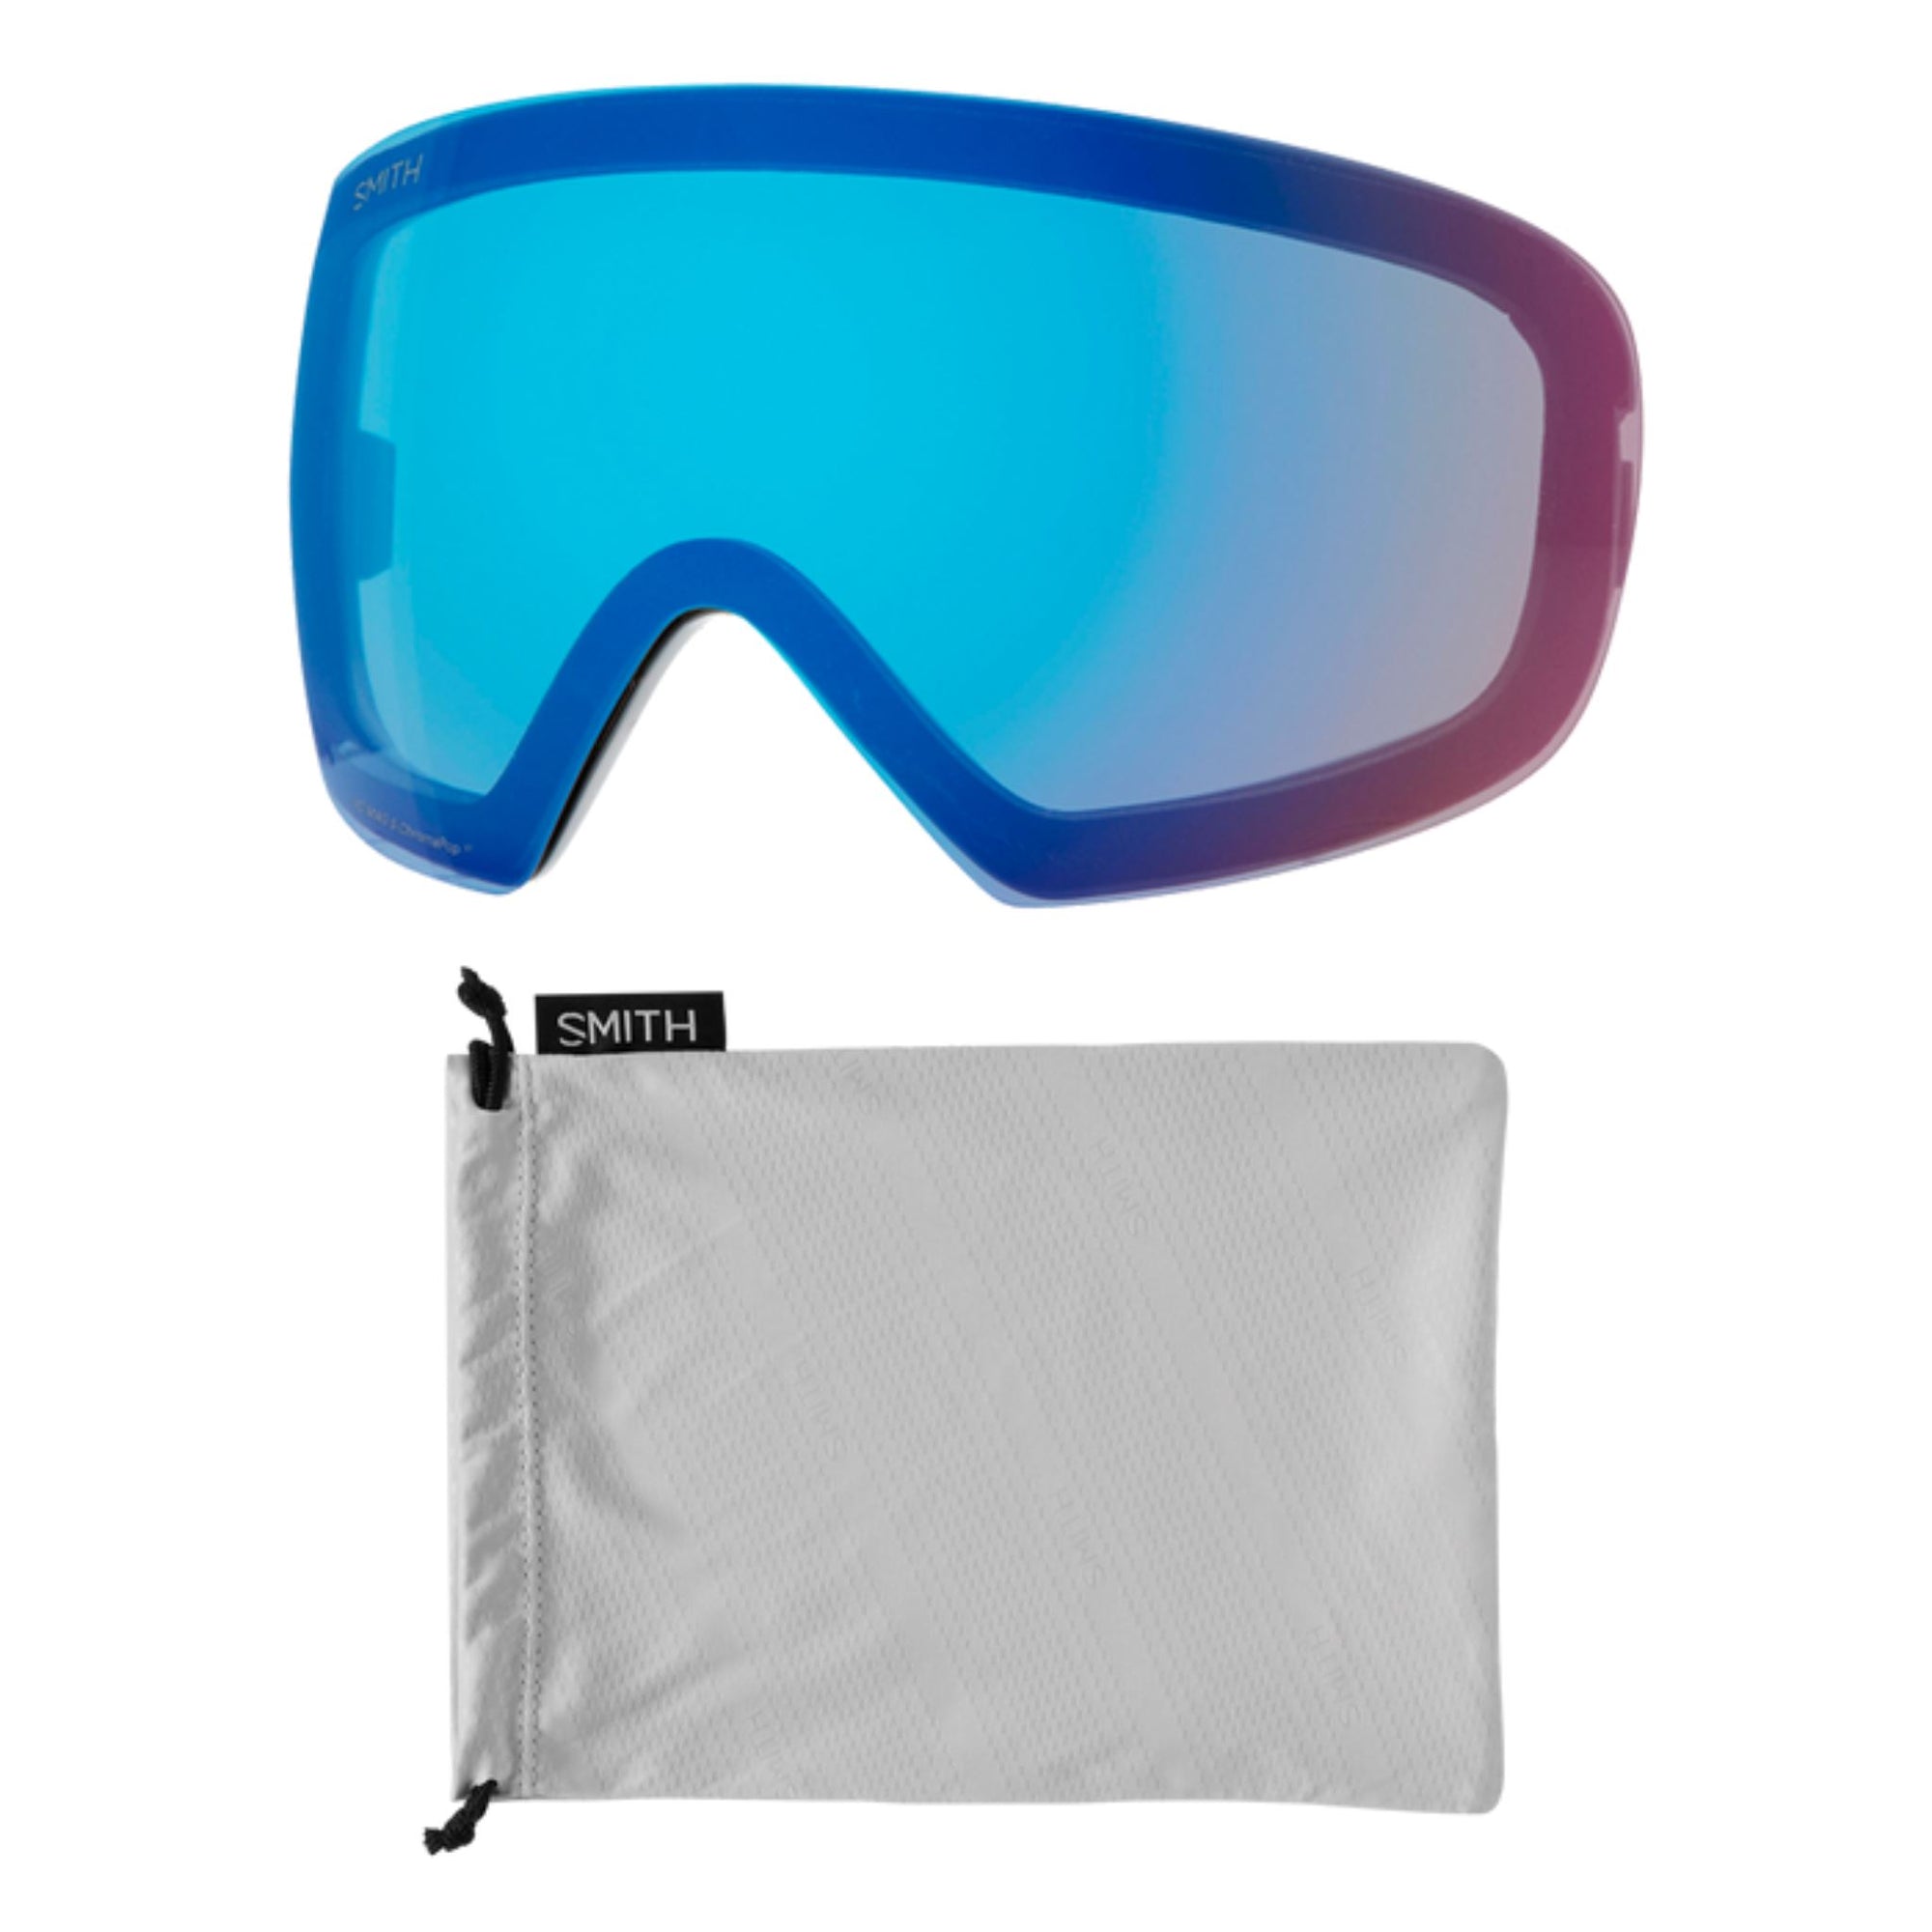 Smith I/O MAG S Goggles (Small Fit) - White Chunky Knit ChromaPop Everyday Rose Gold Mirror 